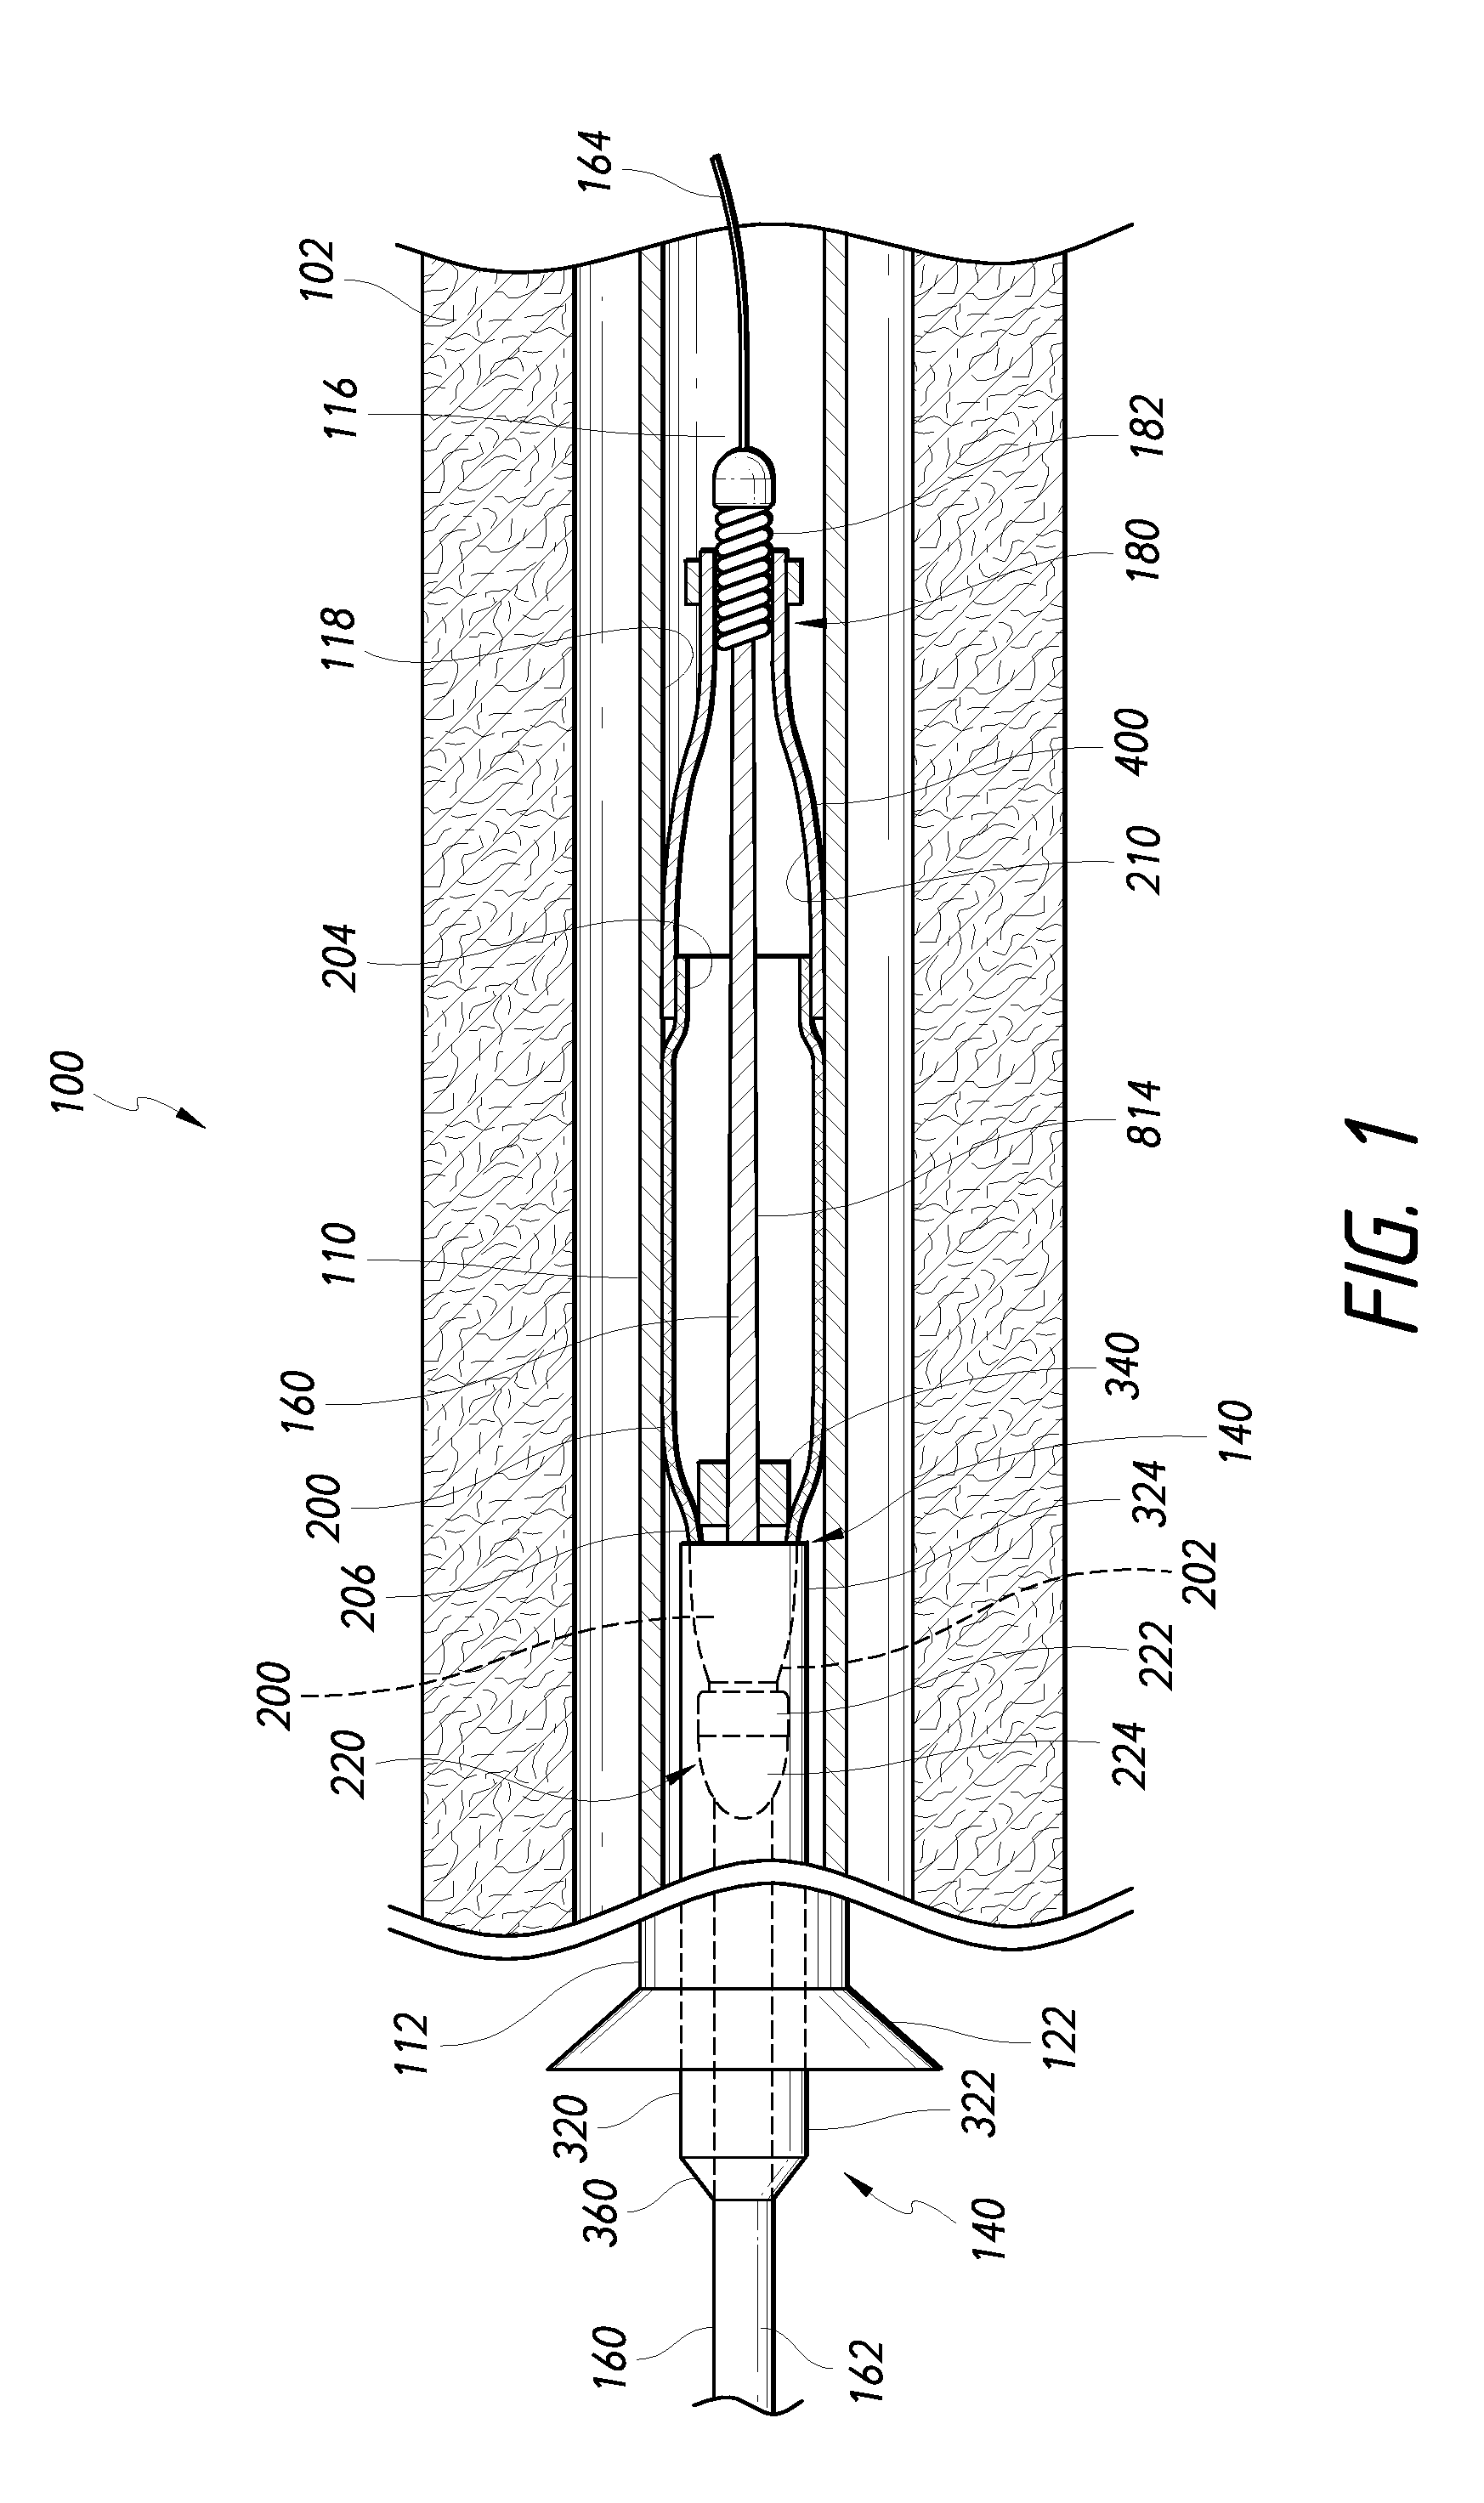 Methods and apparatus for luminal stenting